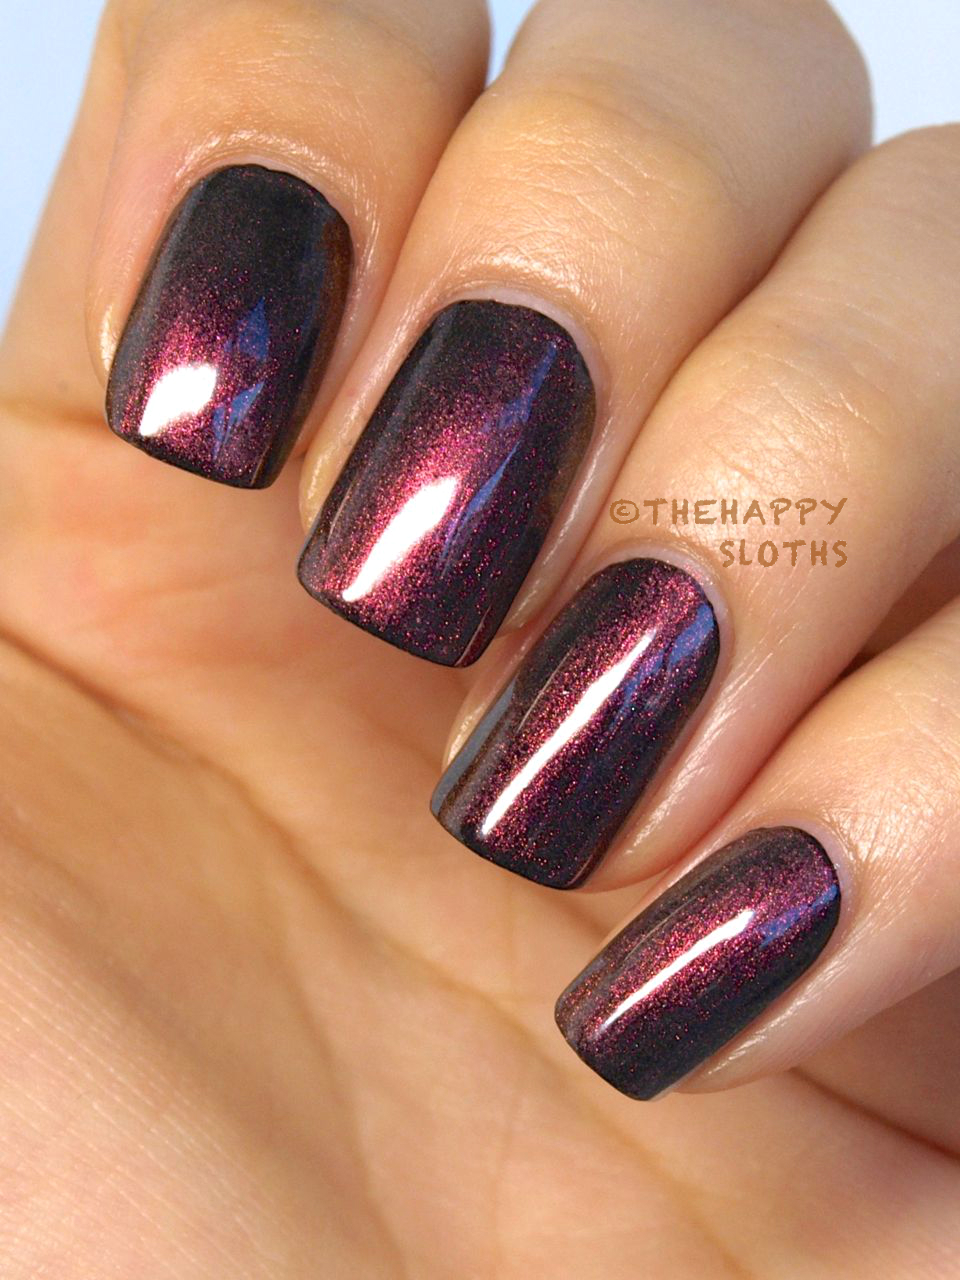 M∙A∙C Nail Transformations Nail Lacquer in "Pink Pearl" & "Green Pearl": Review and Swatches